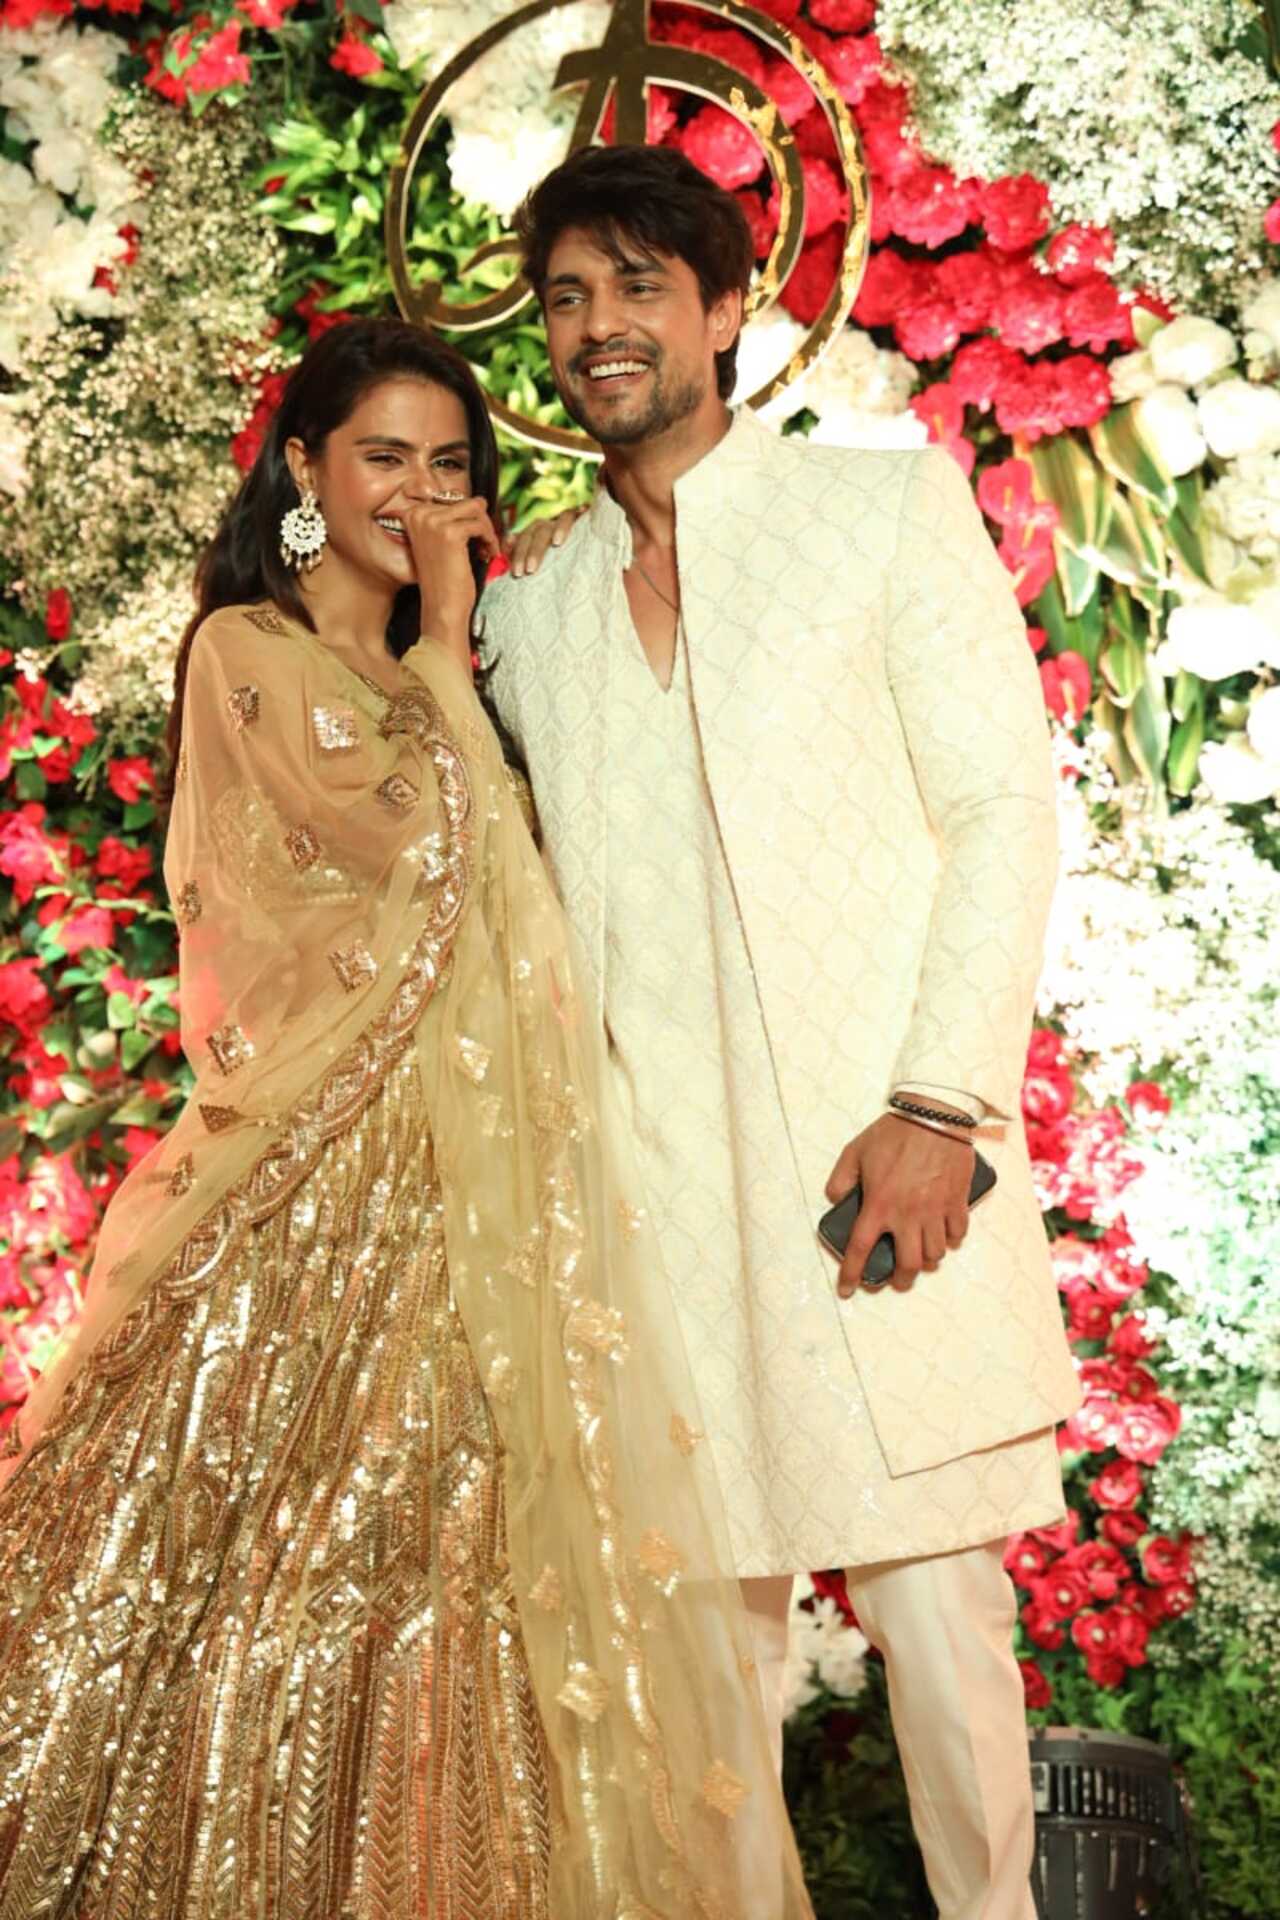 Priyanka Chahar Chaudhary and Ankit Gupta could not stop smiling as they posed together for the paparazzi